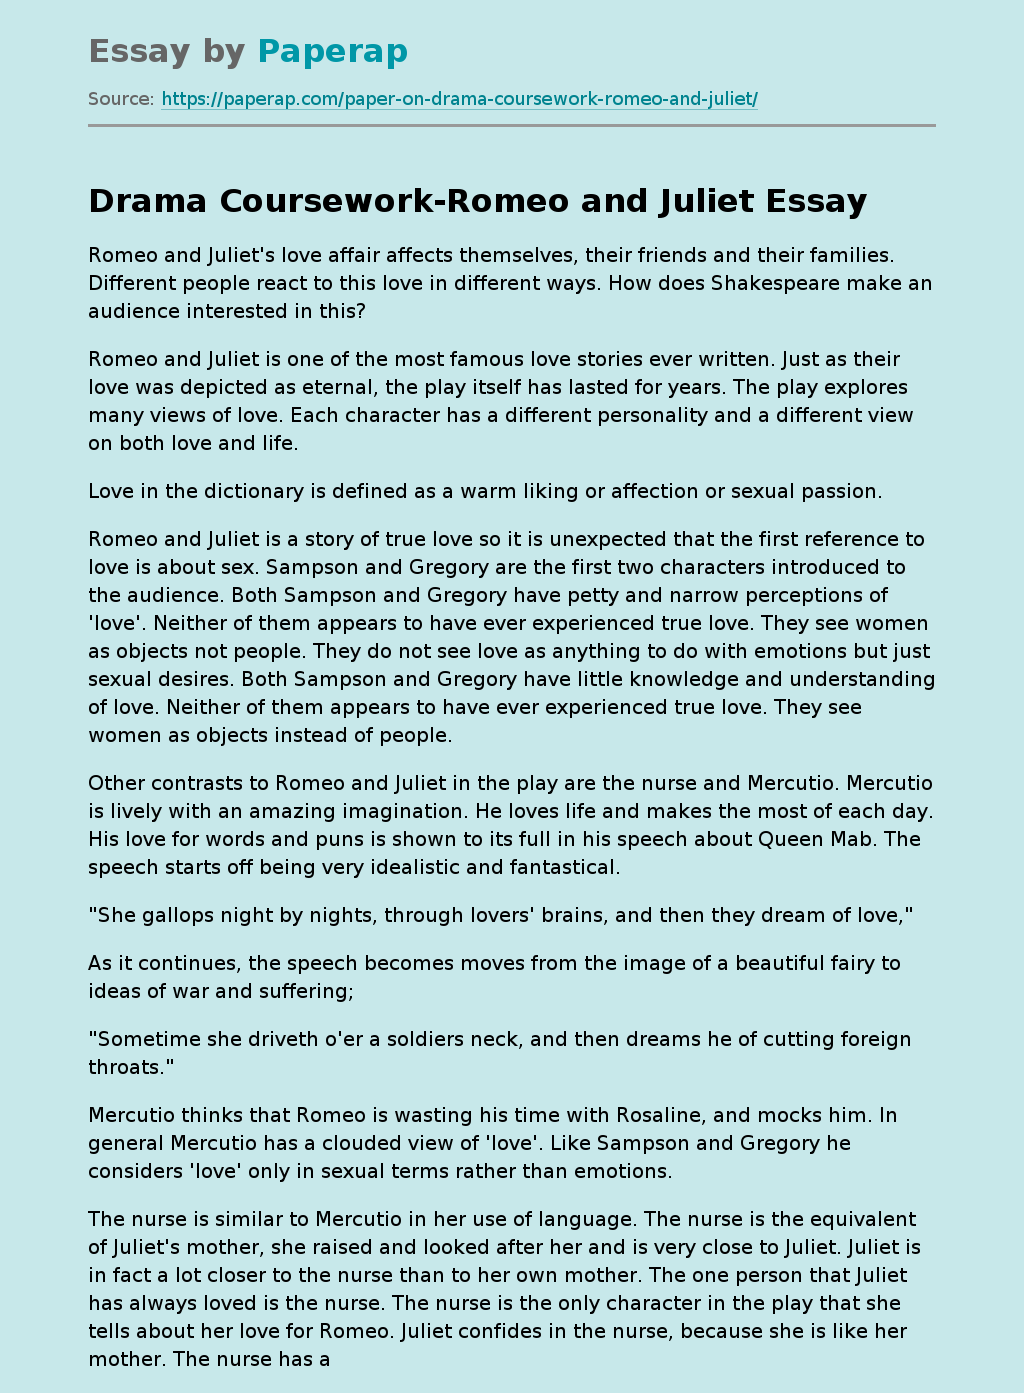 Drama Coursework-Romeo and Juliet